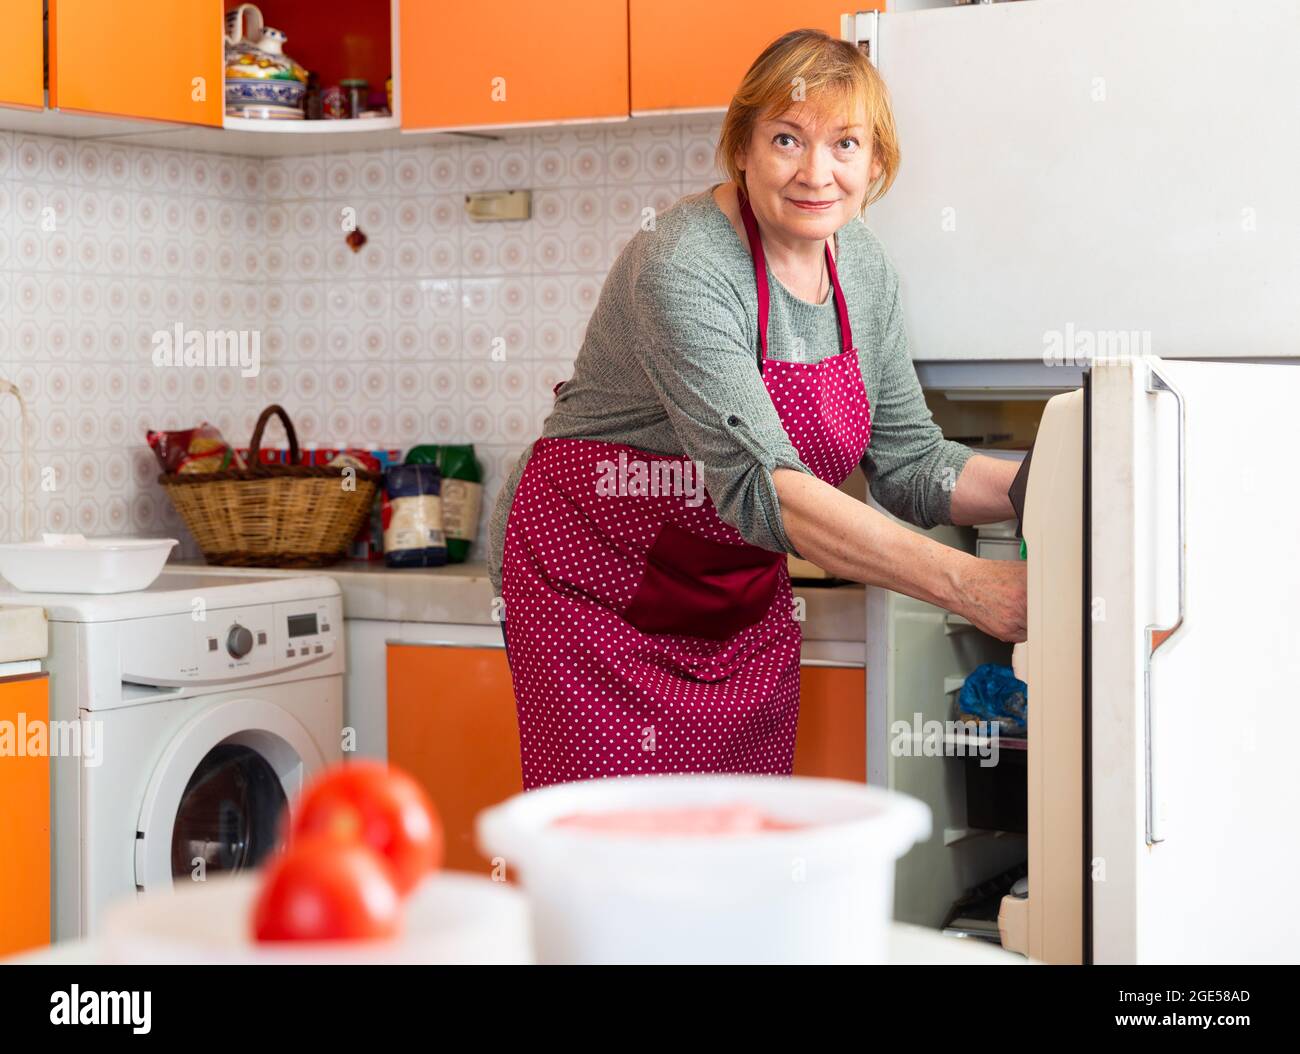 Elderly woman cooks preparing food in the kitchen Stock Photo